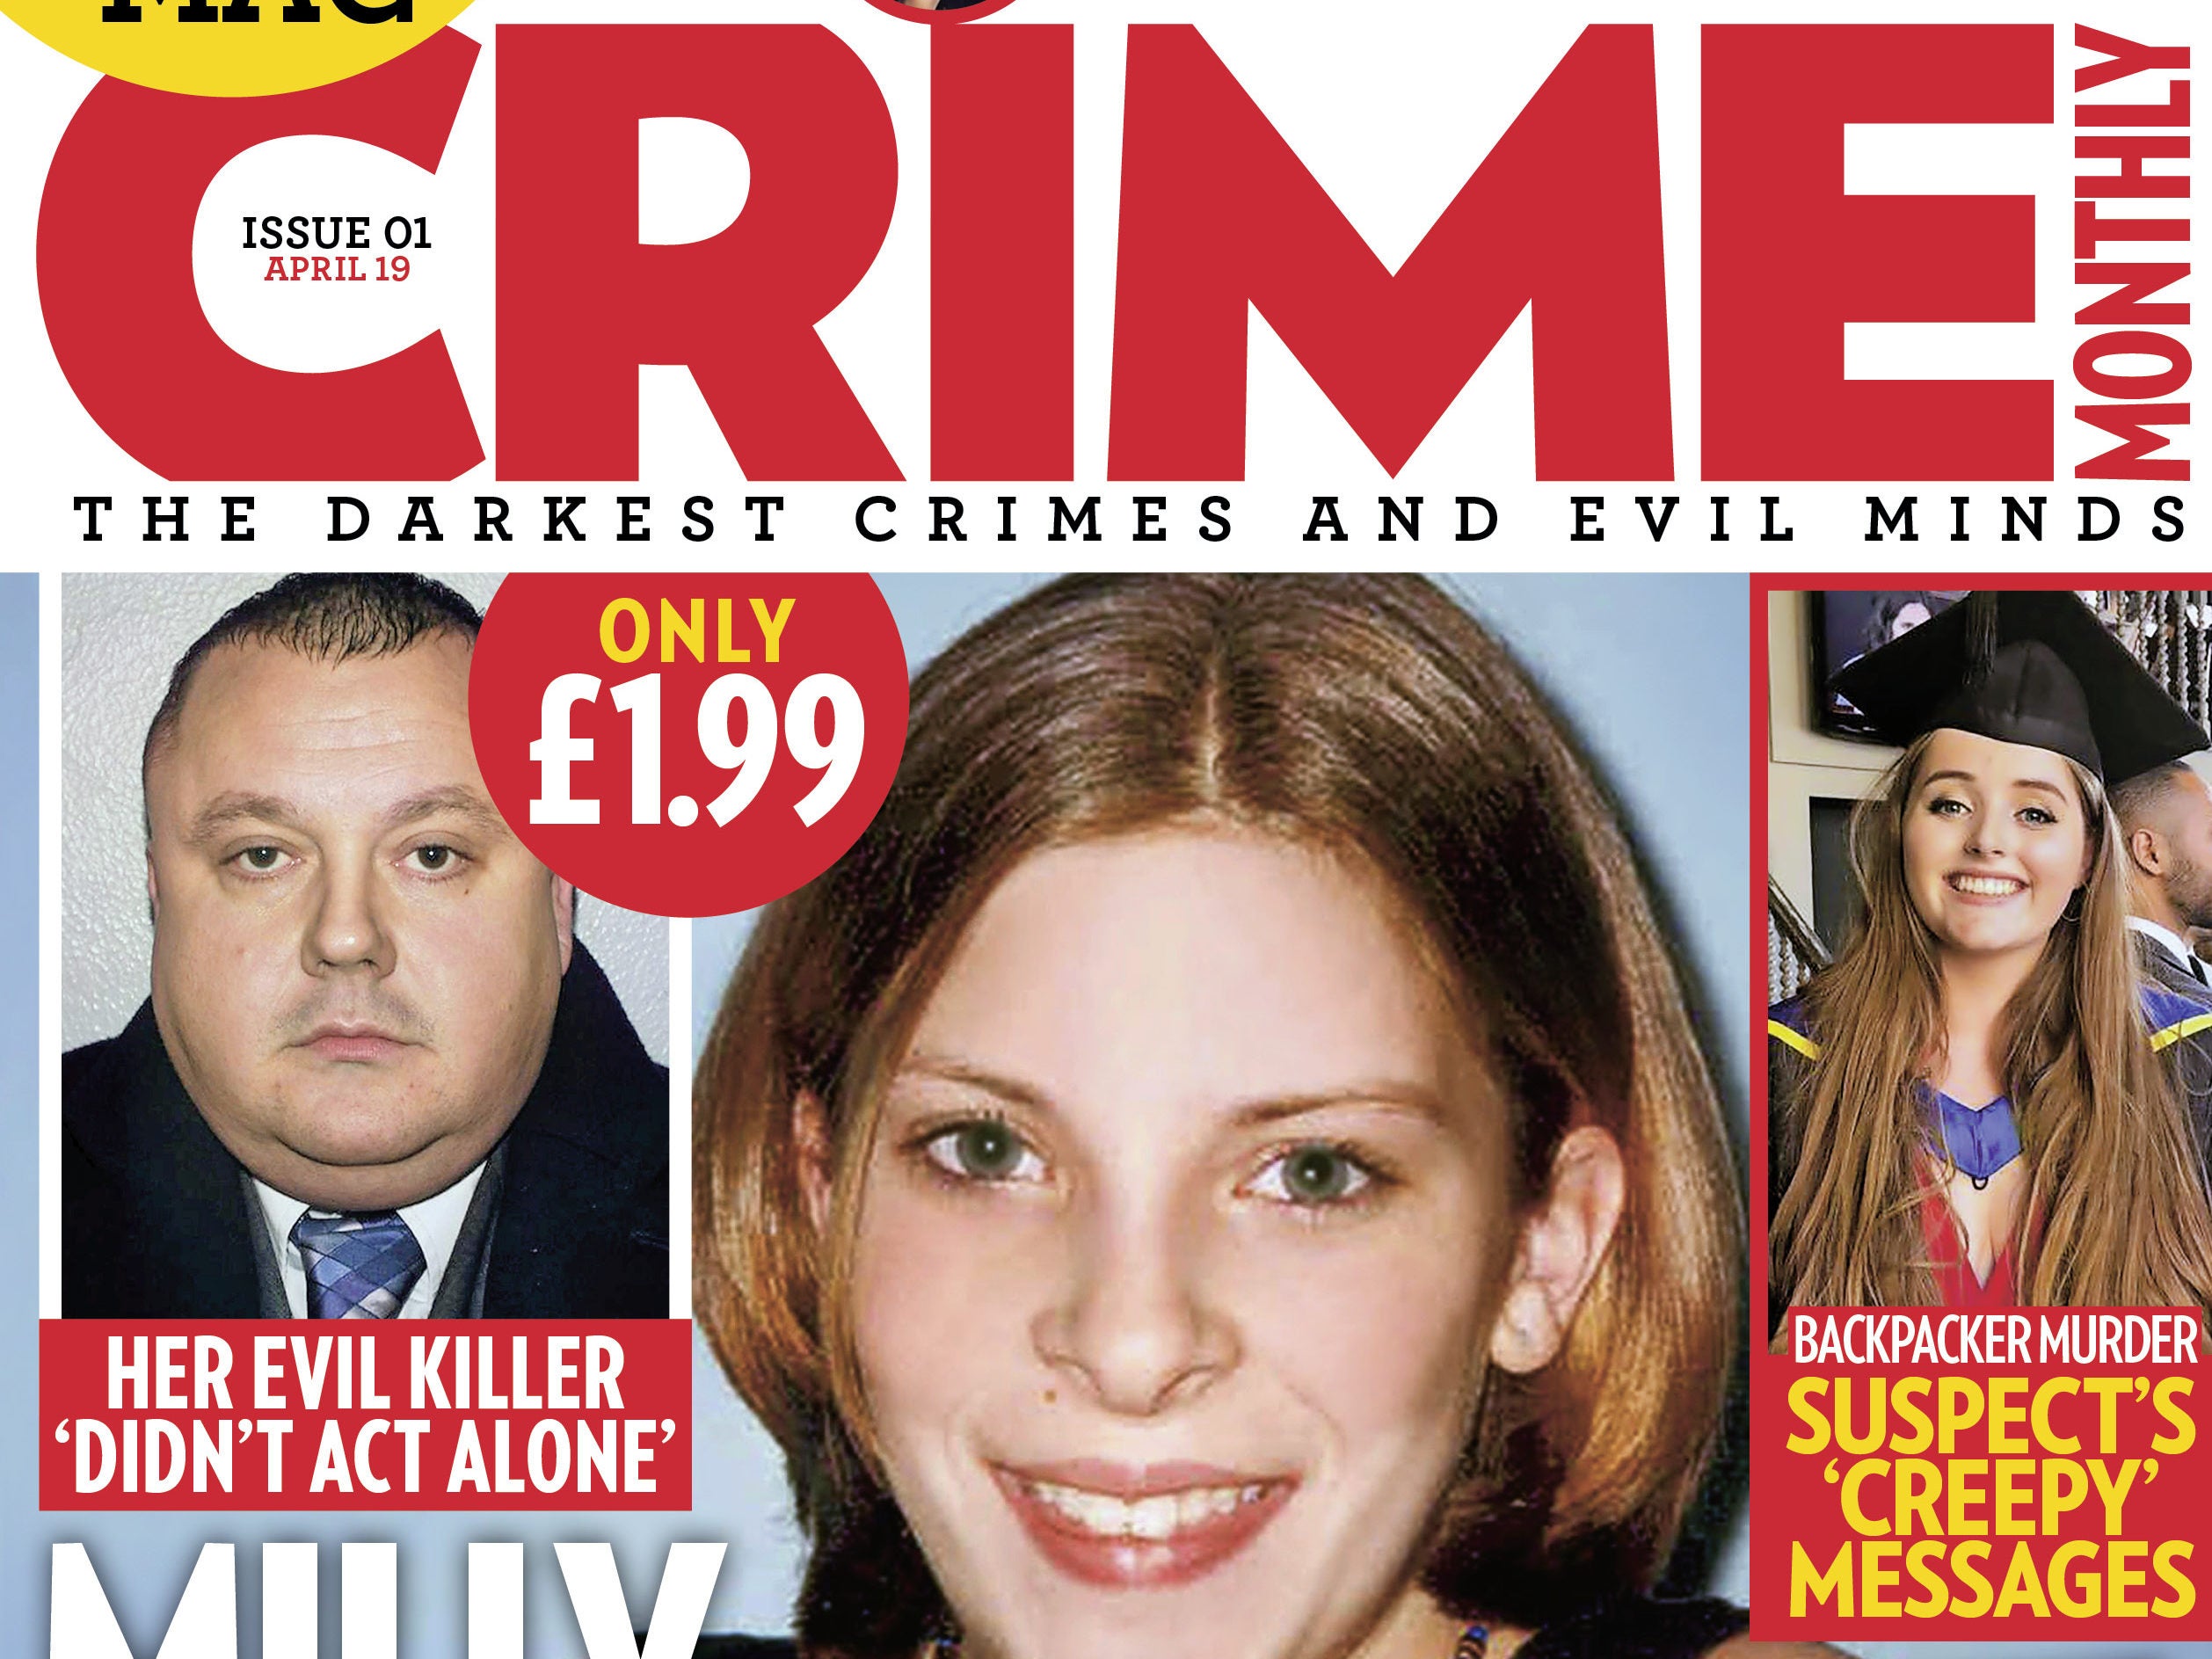 Bauer launches new true crime monthly aimed at women to tap into growing market